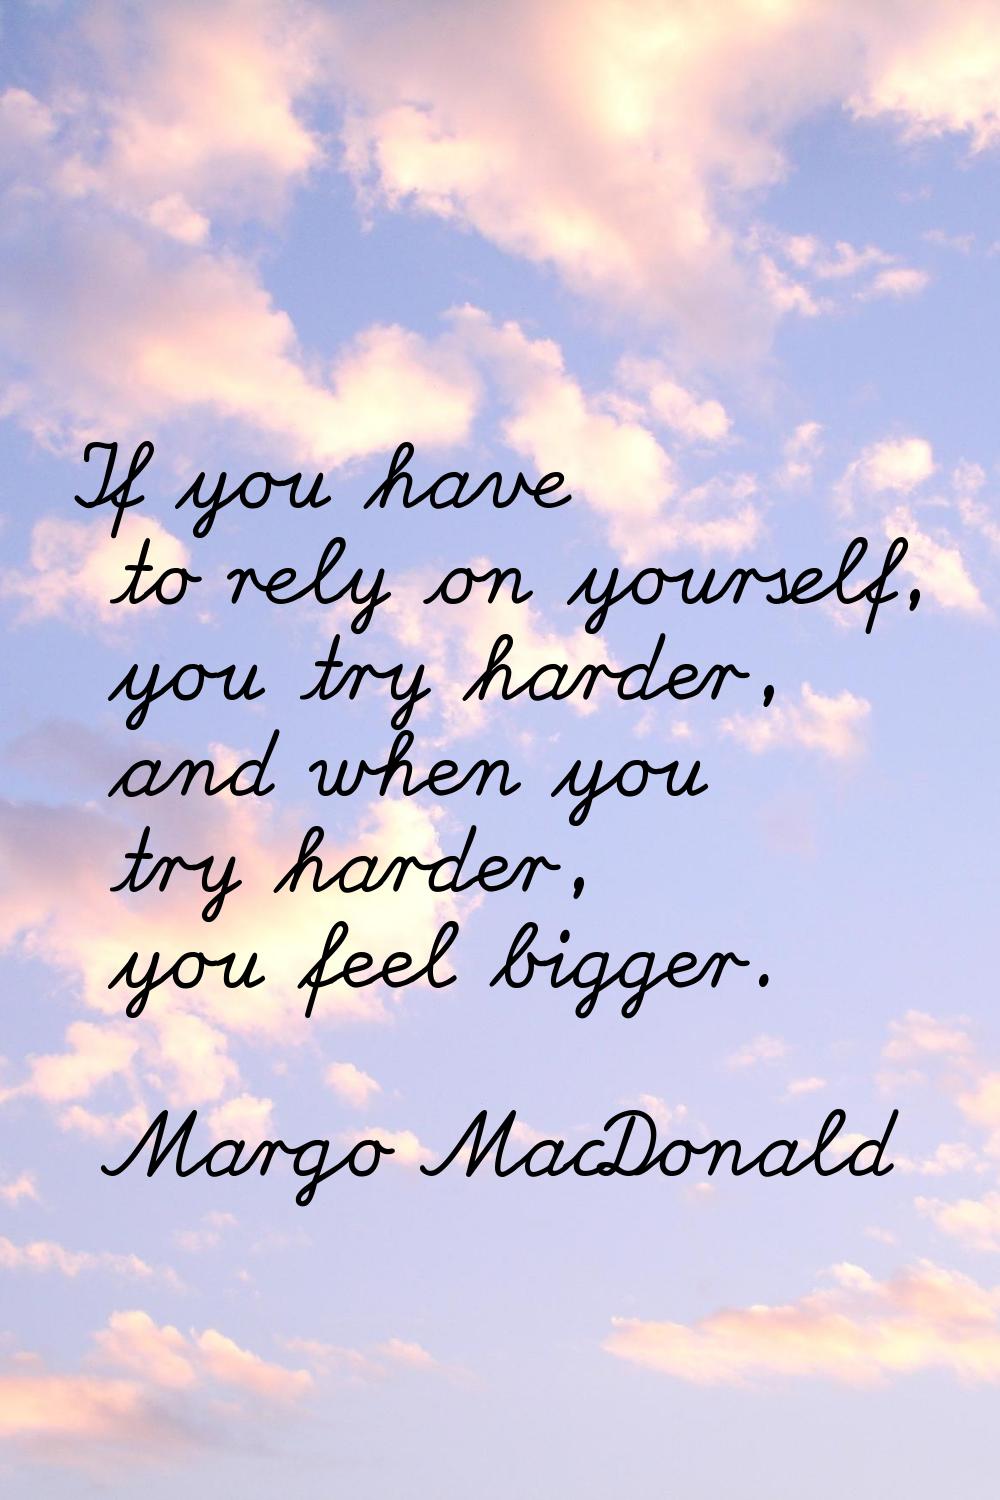 If you have to rely on yourself, you try harder, and when you try harder, you feel bigger.